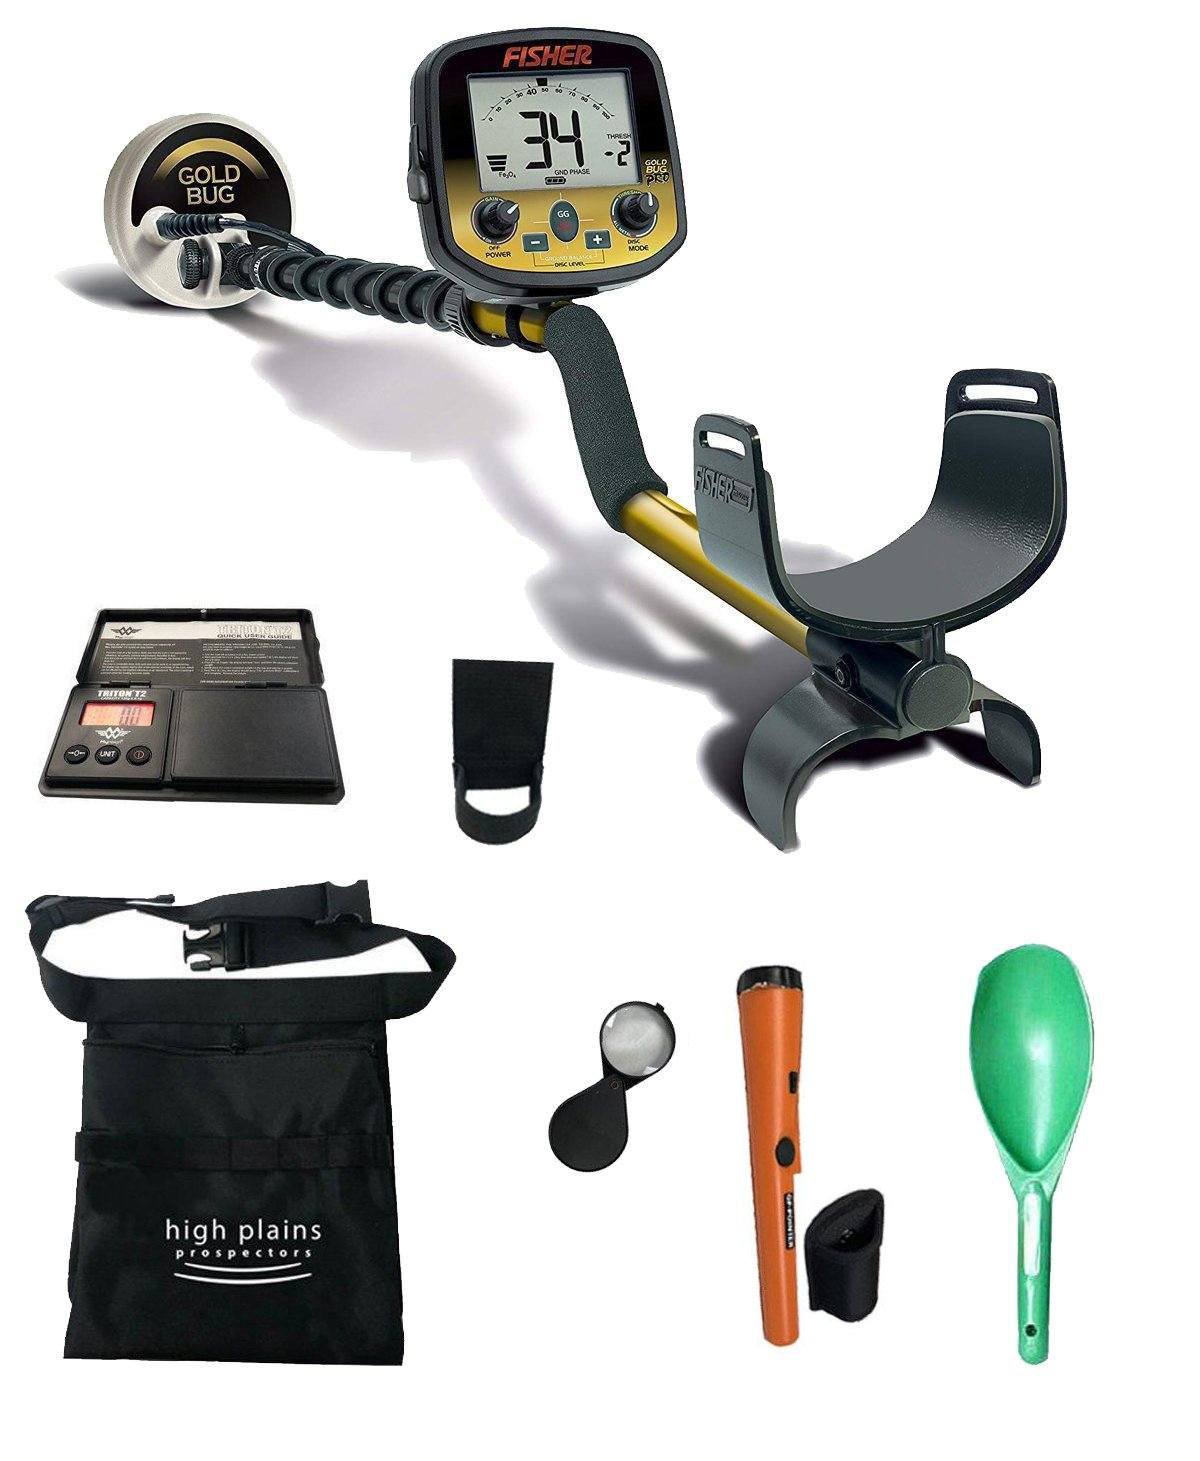 Fisher Gold Bug Pro Metal Detector Bundle with Free GP Pointer Free Gear